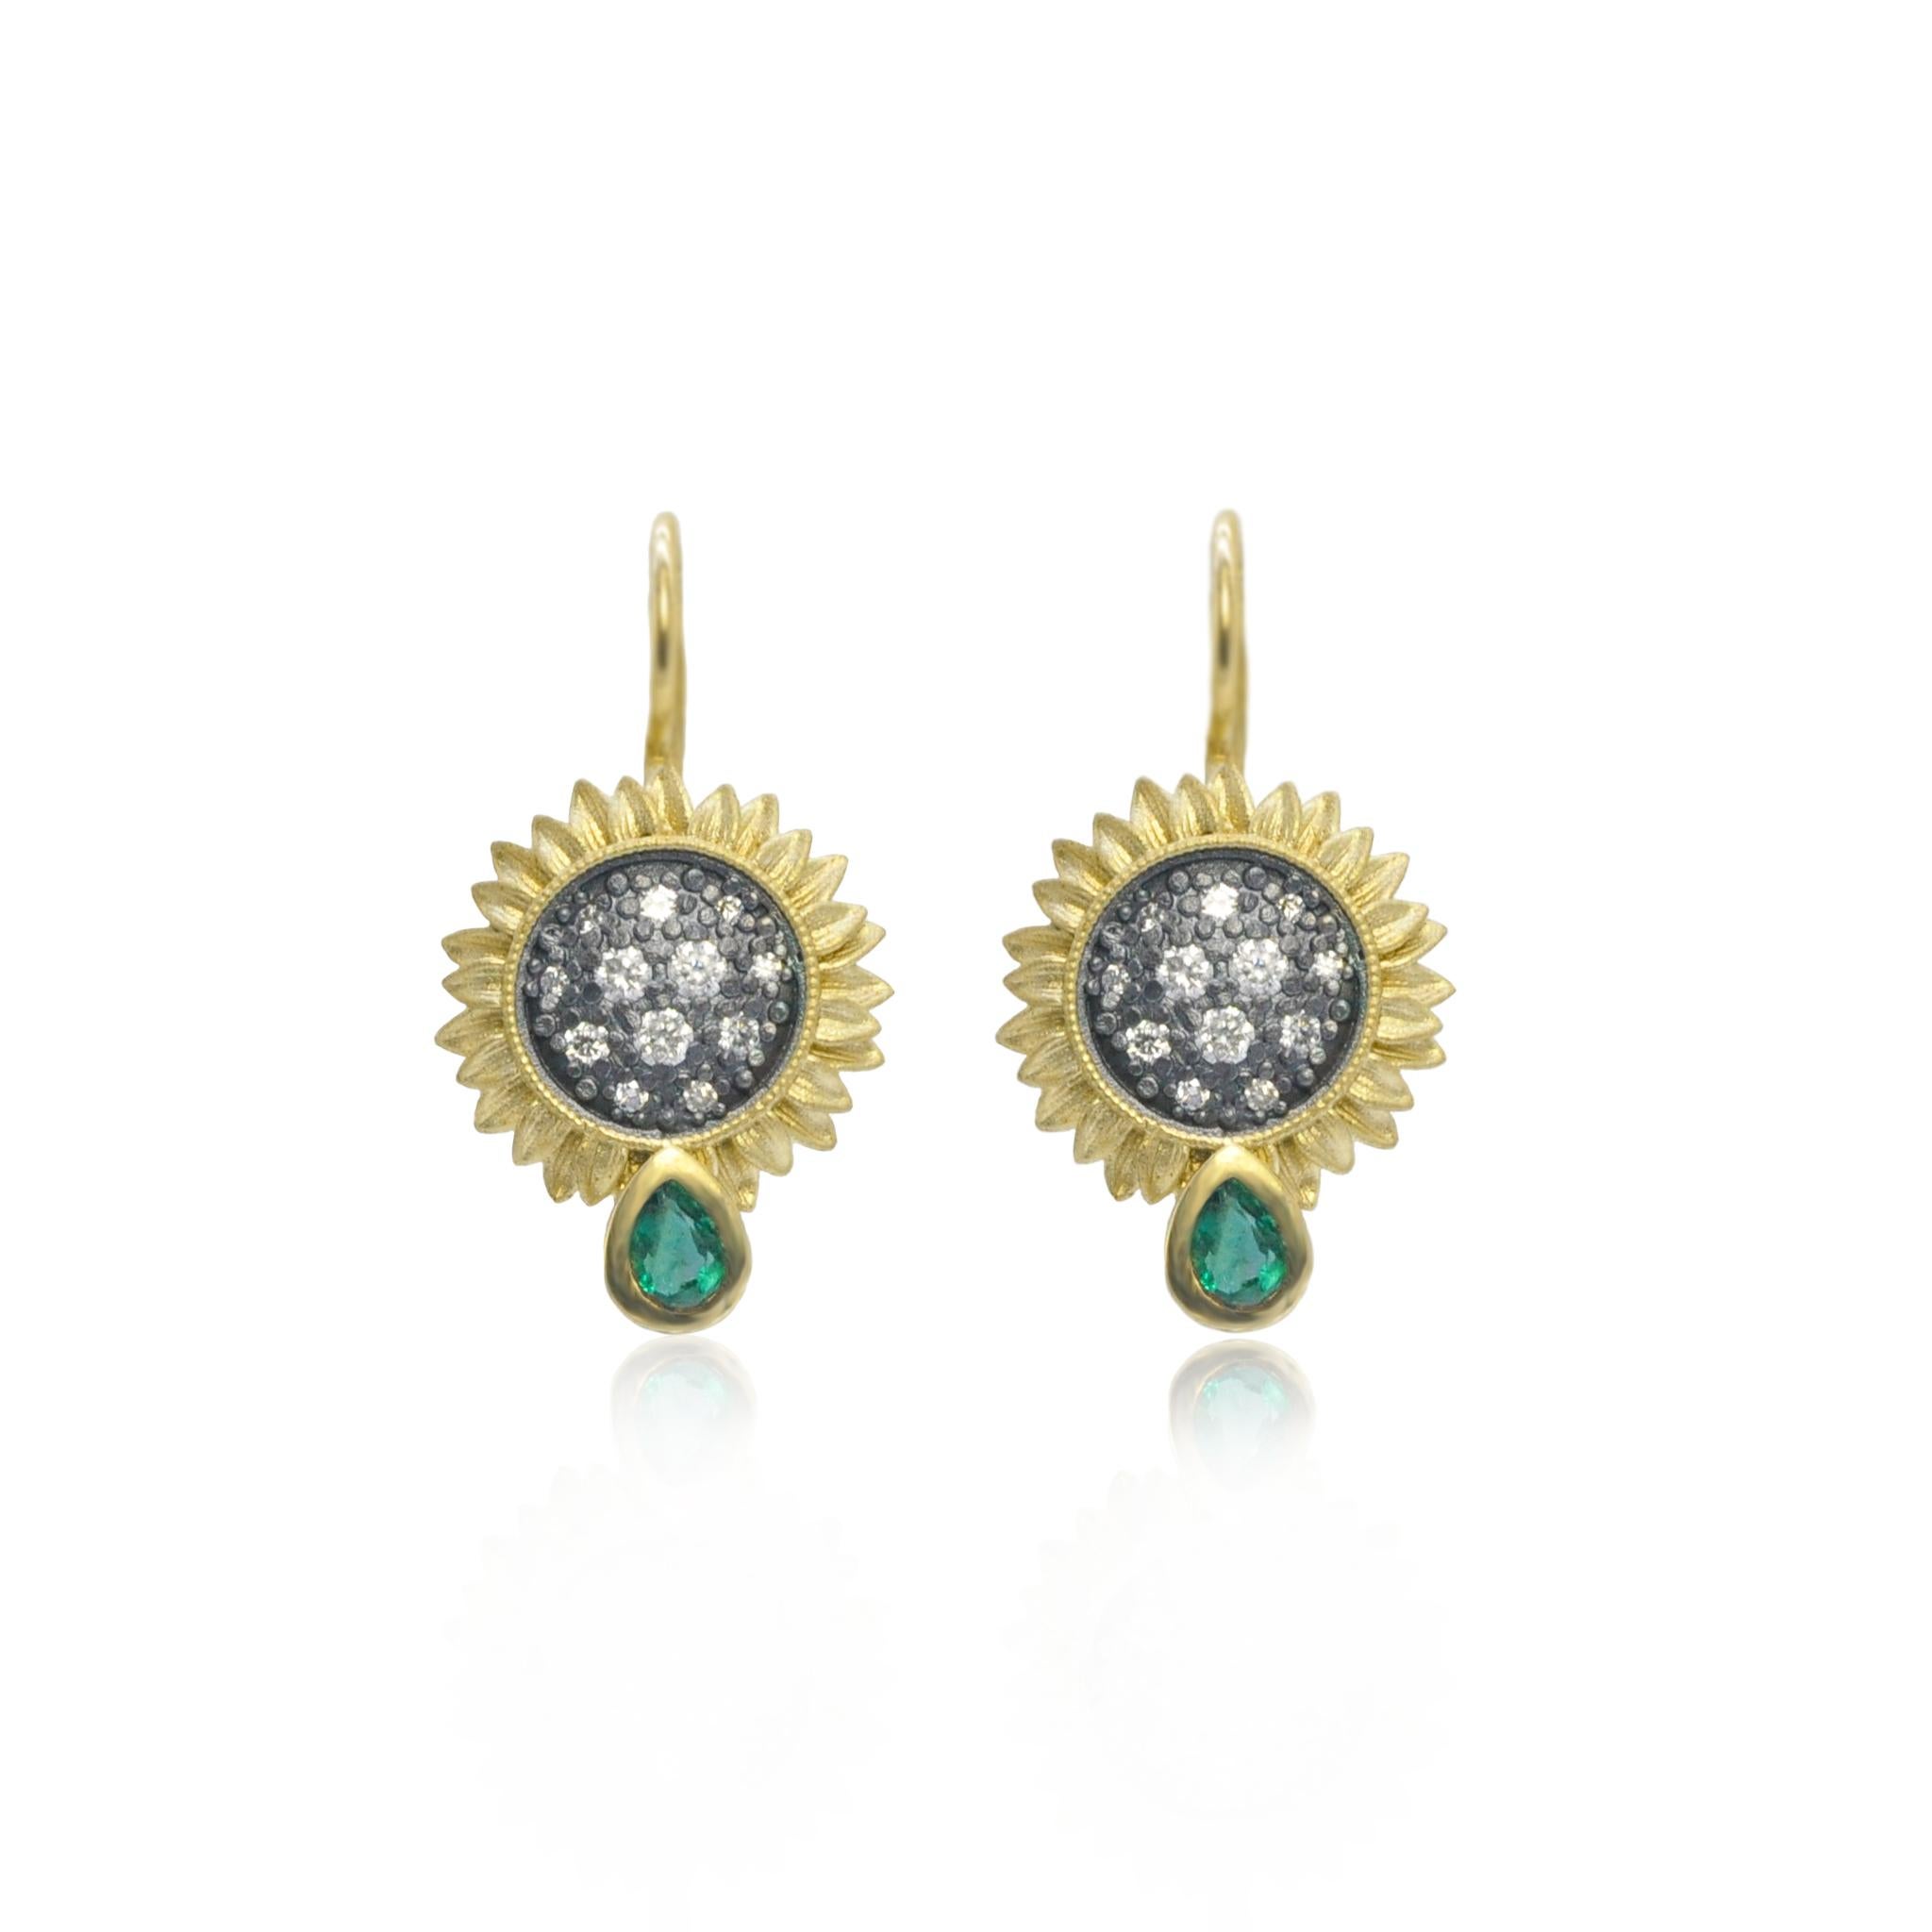 Sunflower Earrings with Pave Set Diamond in Oxidized Silver with Emeralds, Small In New Condition For Sale In Baltimore, MD